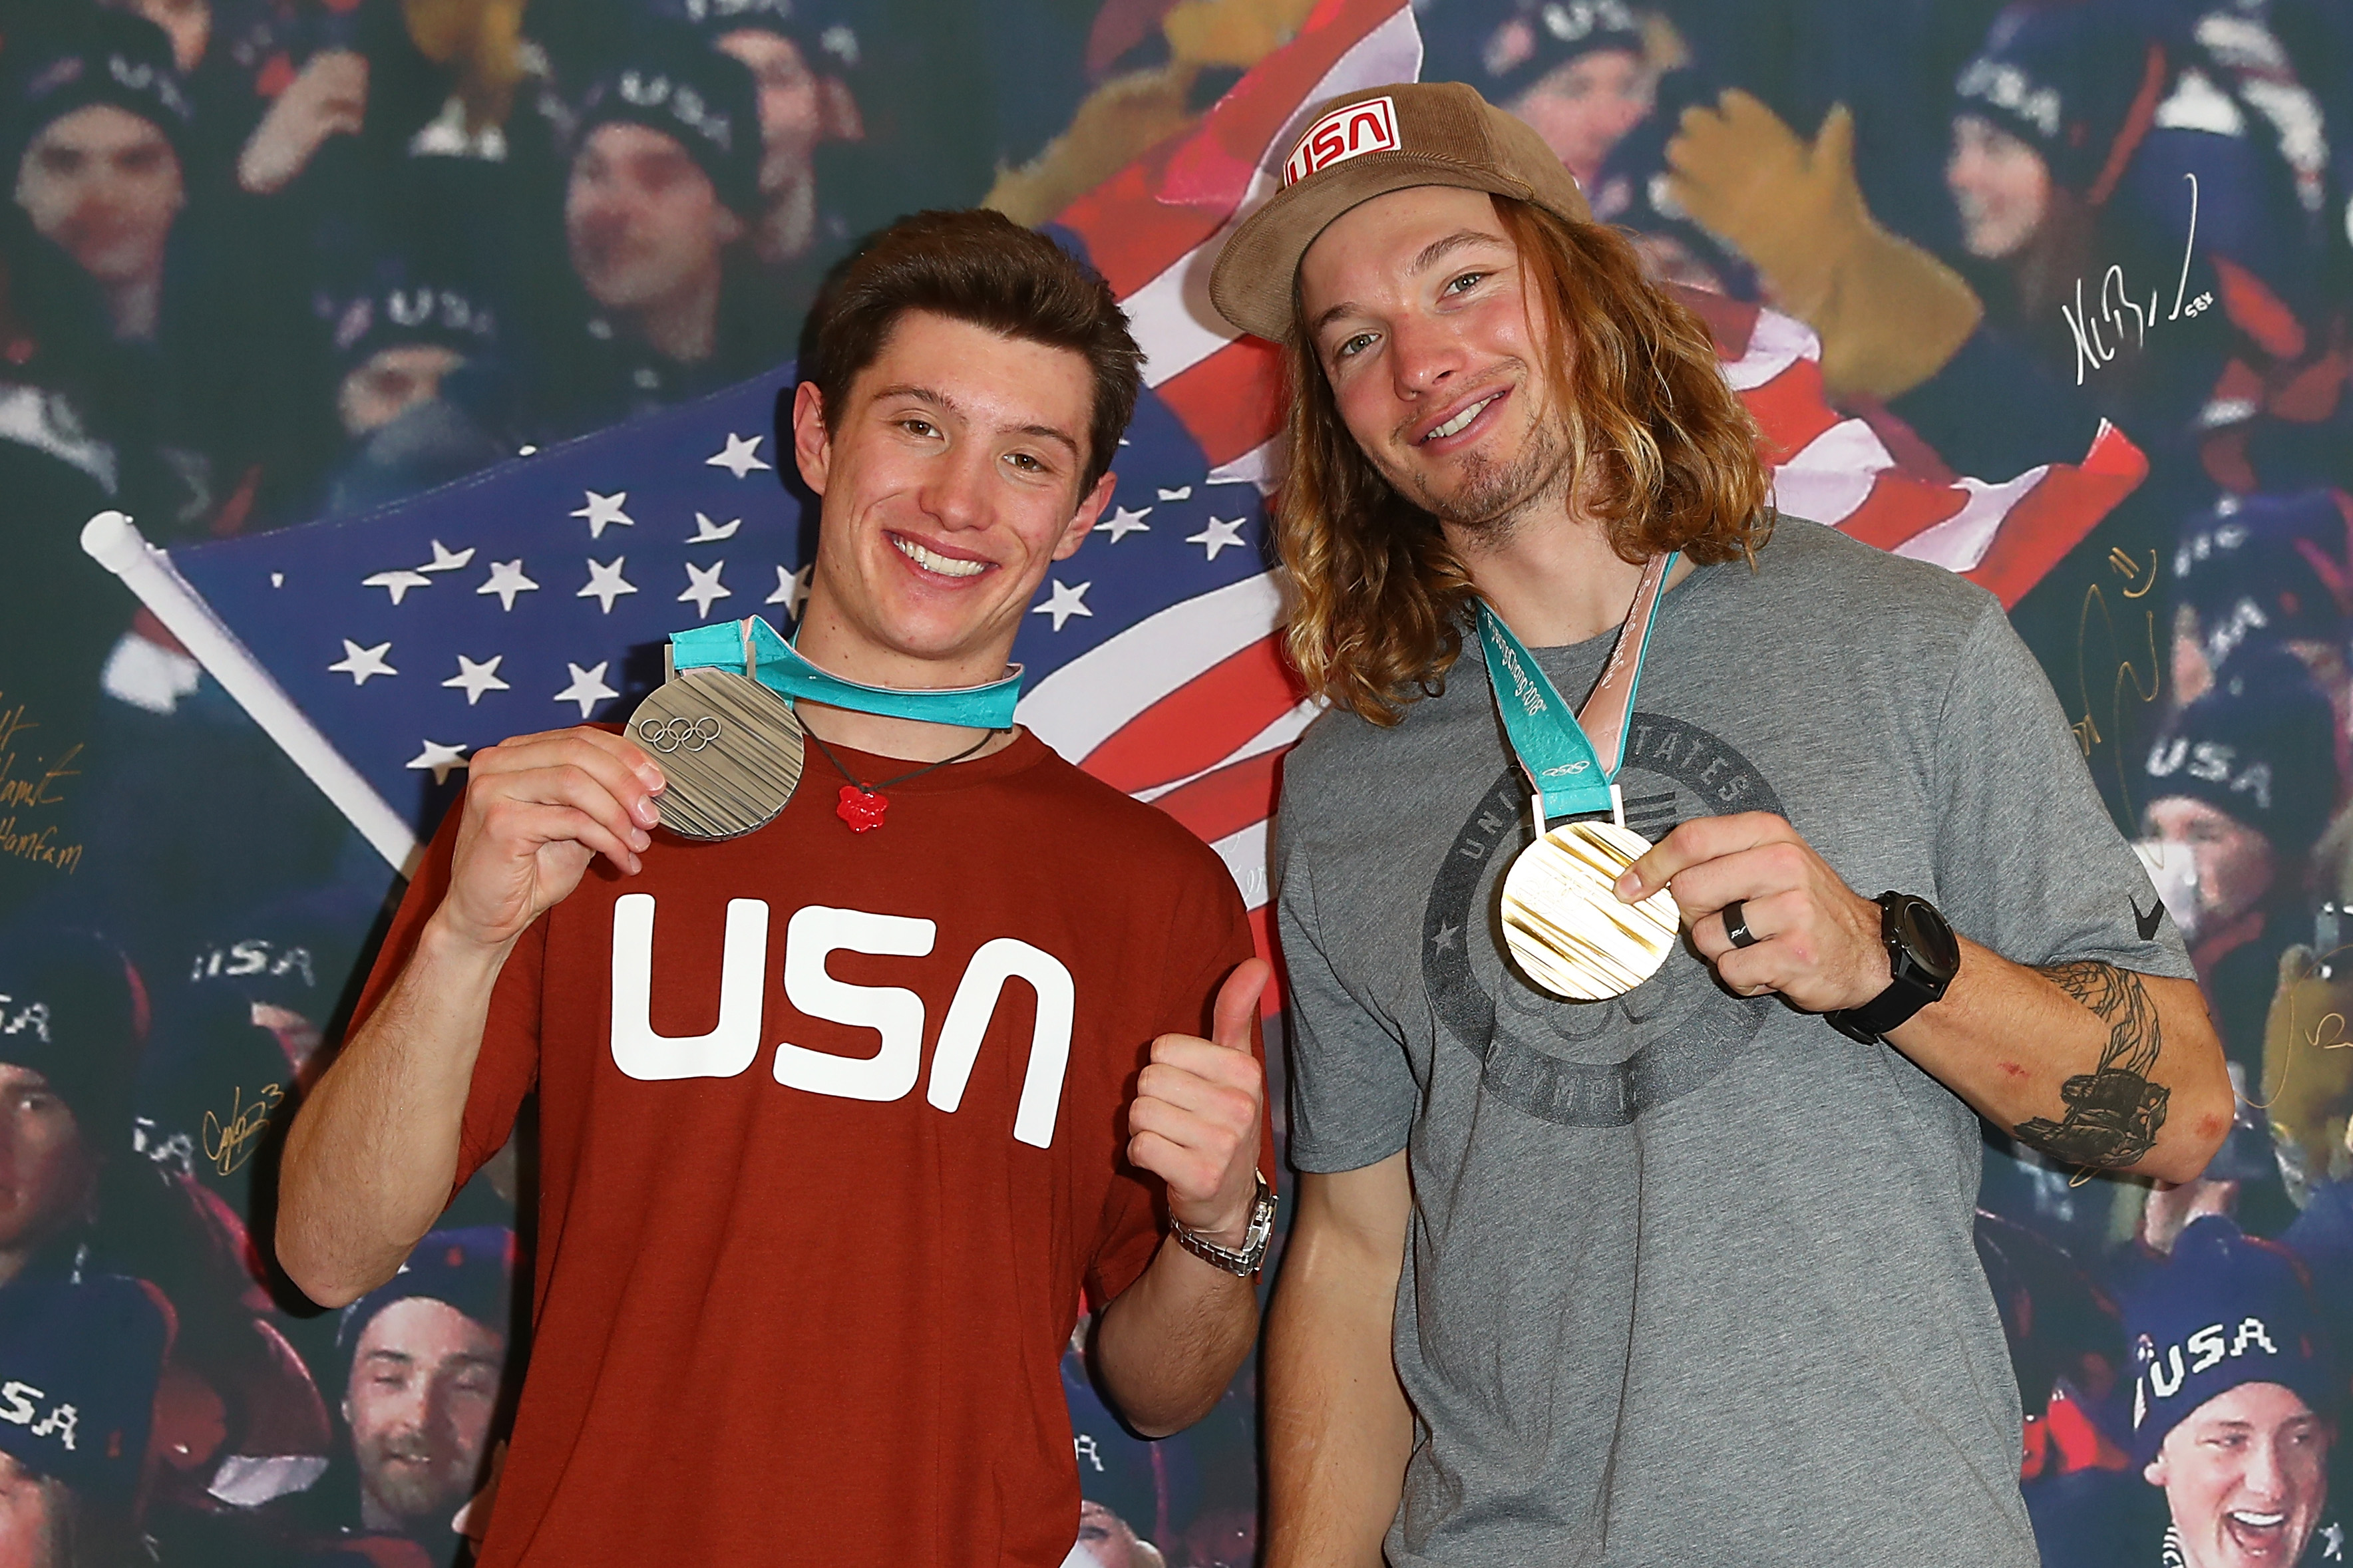 U.S. Olympians Alex Ferreira and David Wise pose for a photo at the USA House at the PyeongChang 2018 Winter Olympic Games on February 23, 2018 in Pyeongchang-gun, South Korea. (Joe Scarnici&mdash;Getty Images for USOC)